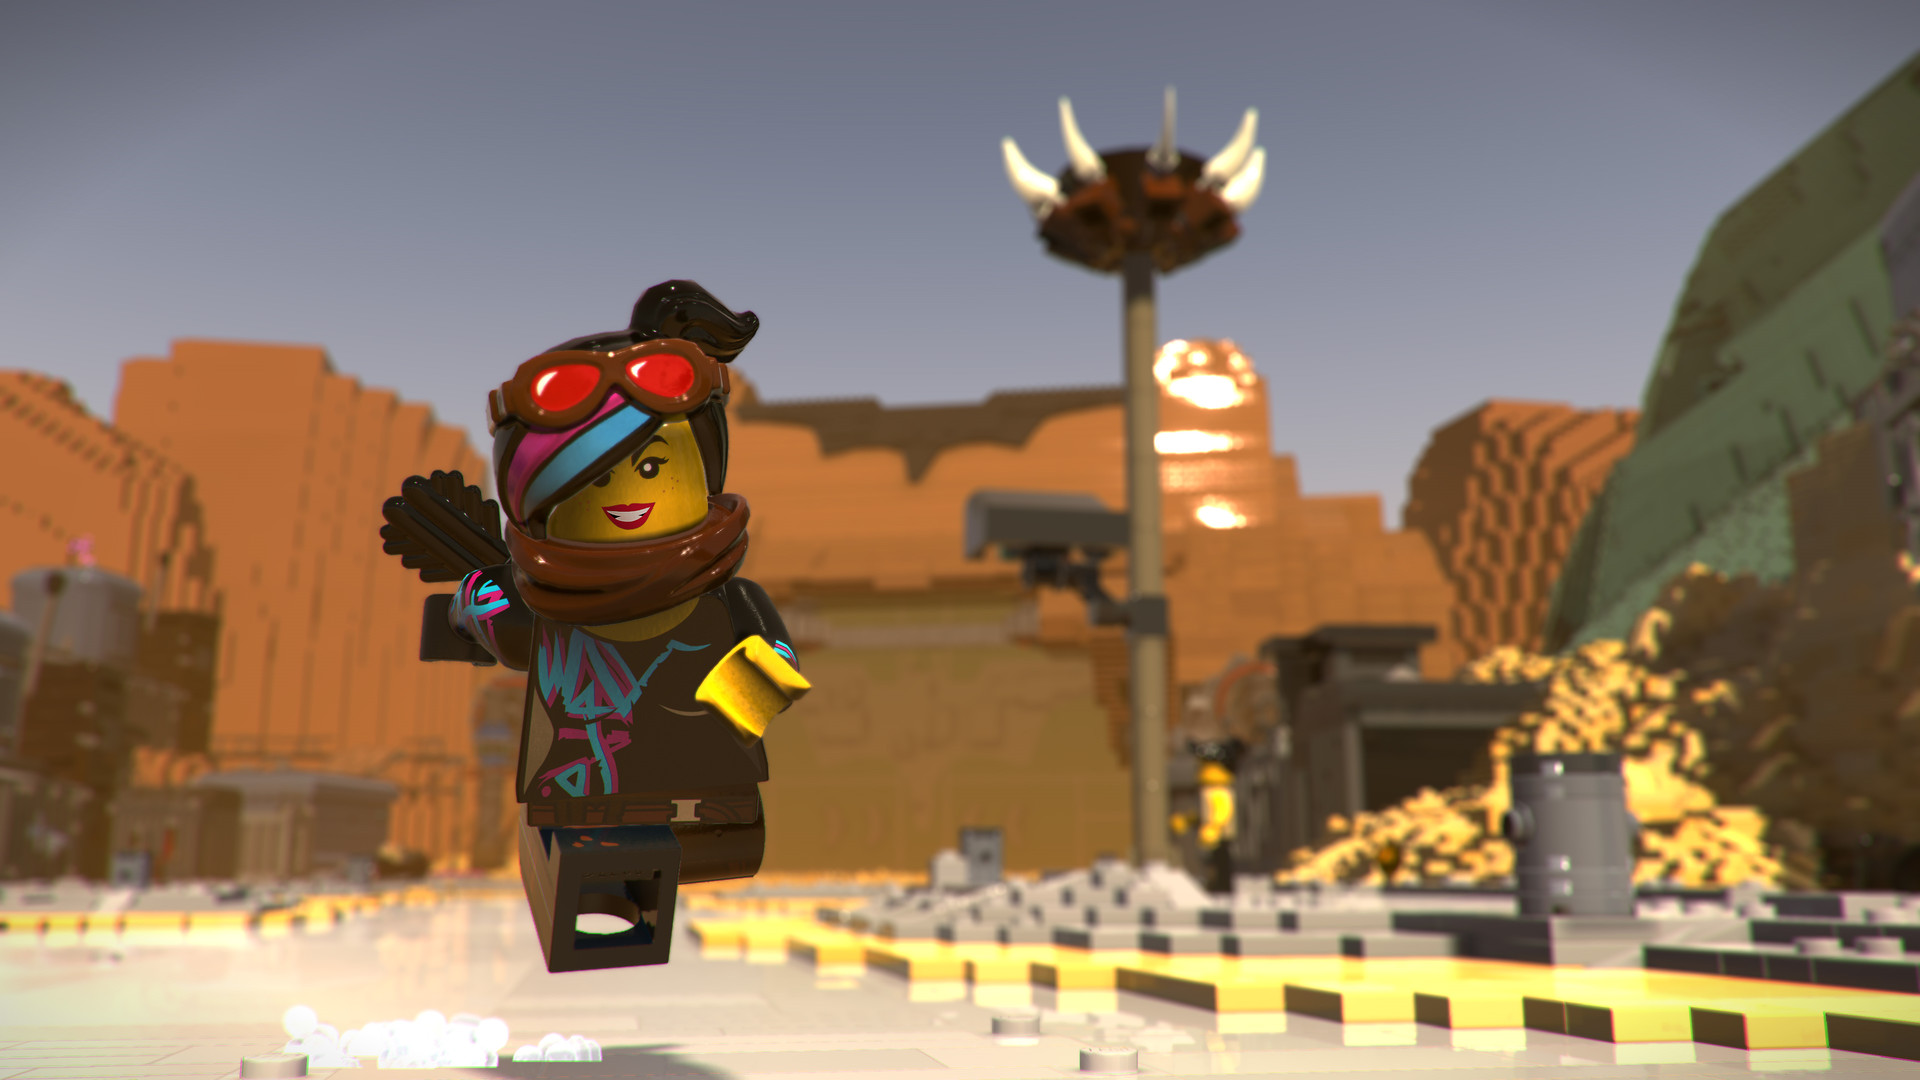 The LEGO Videogame on Steam